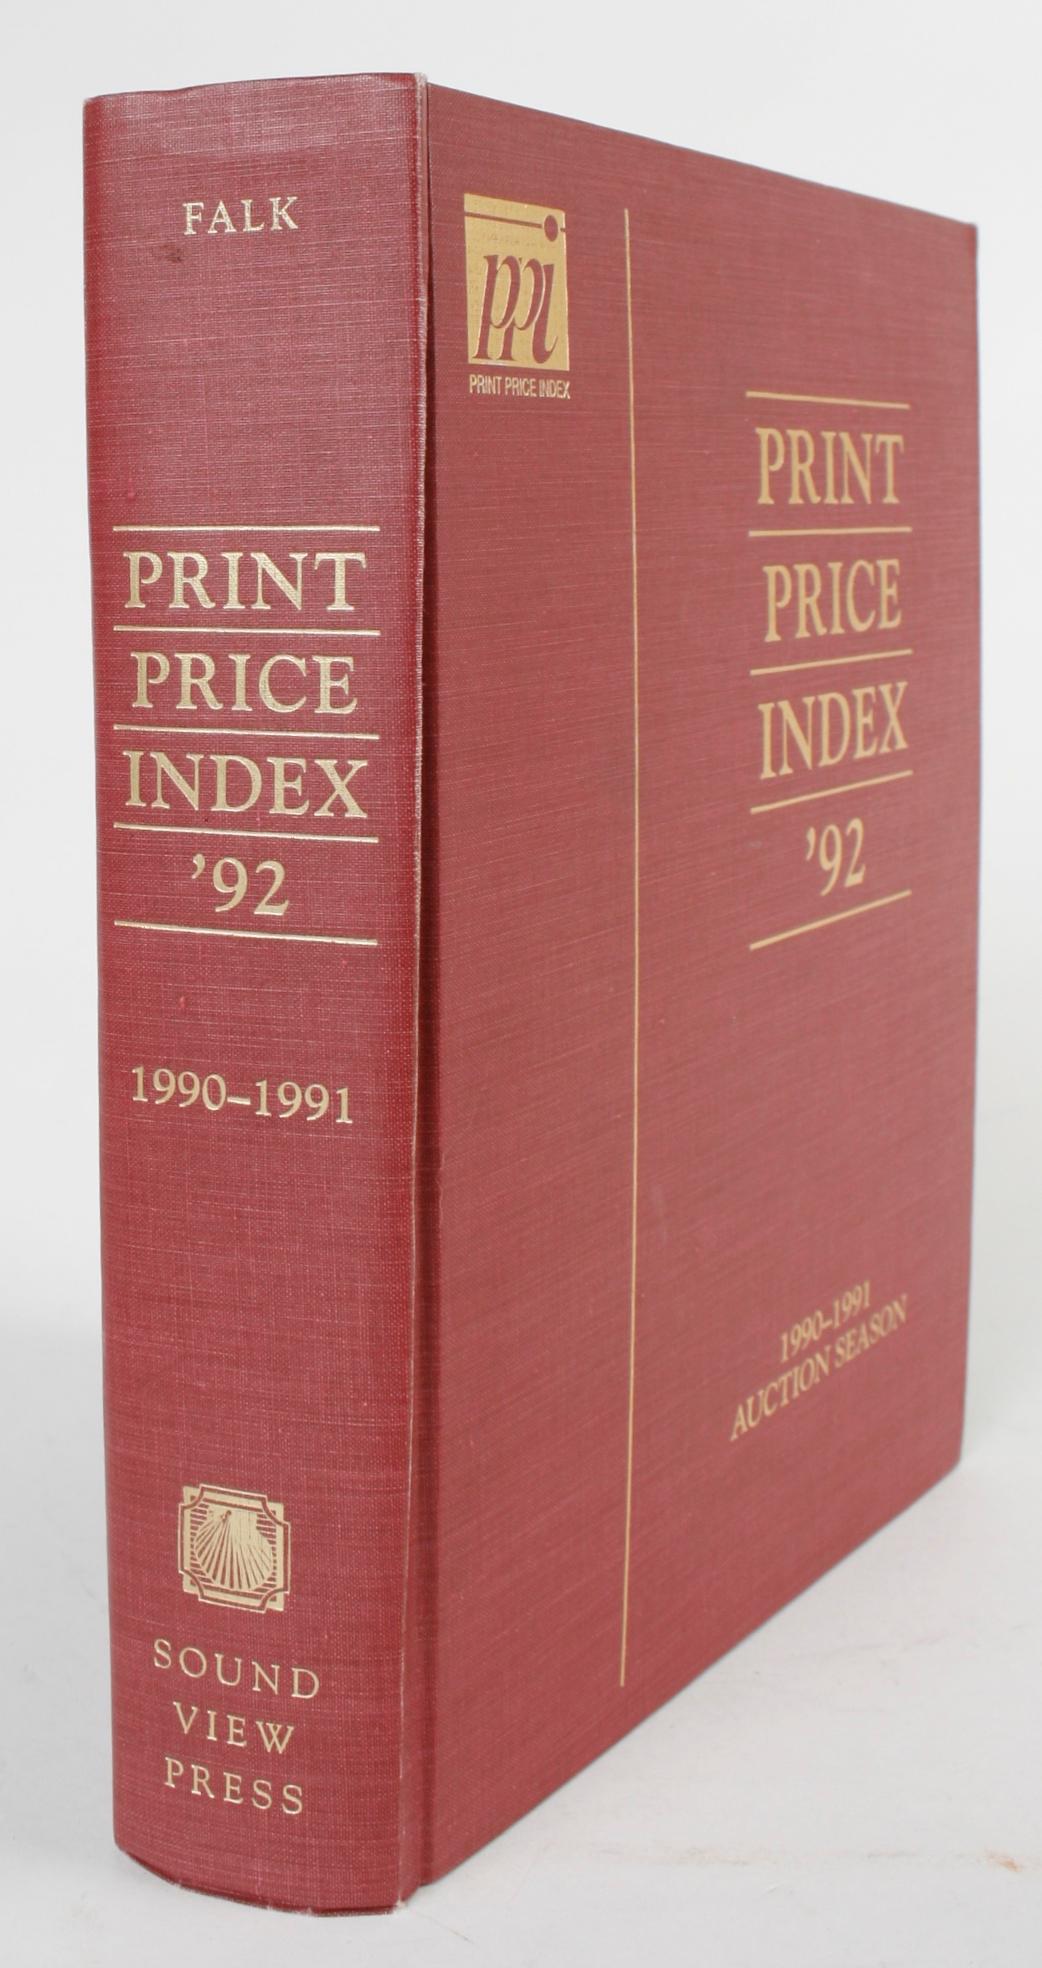 Print Price Index 92: 1990-1991 Auction Season by Peter Falk For Sale 1